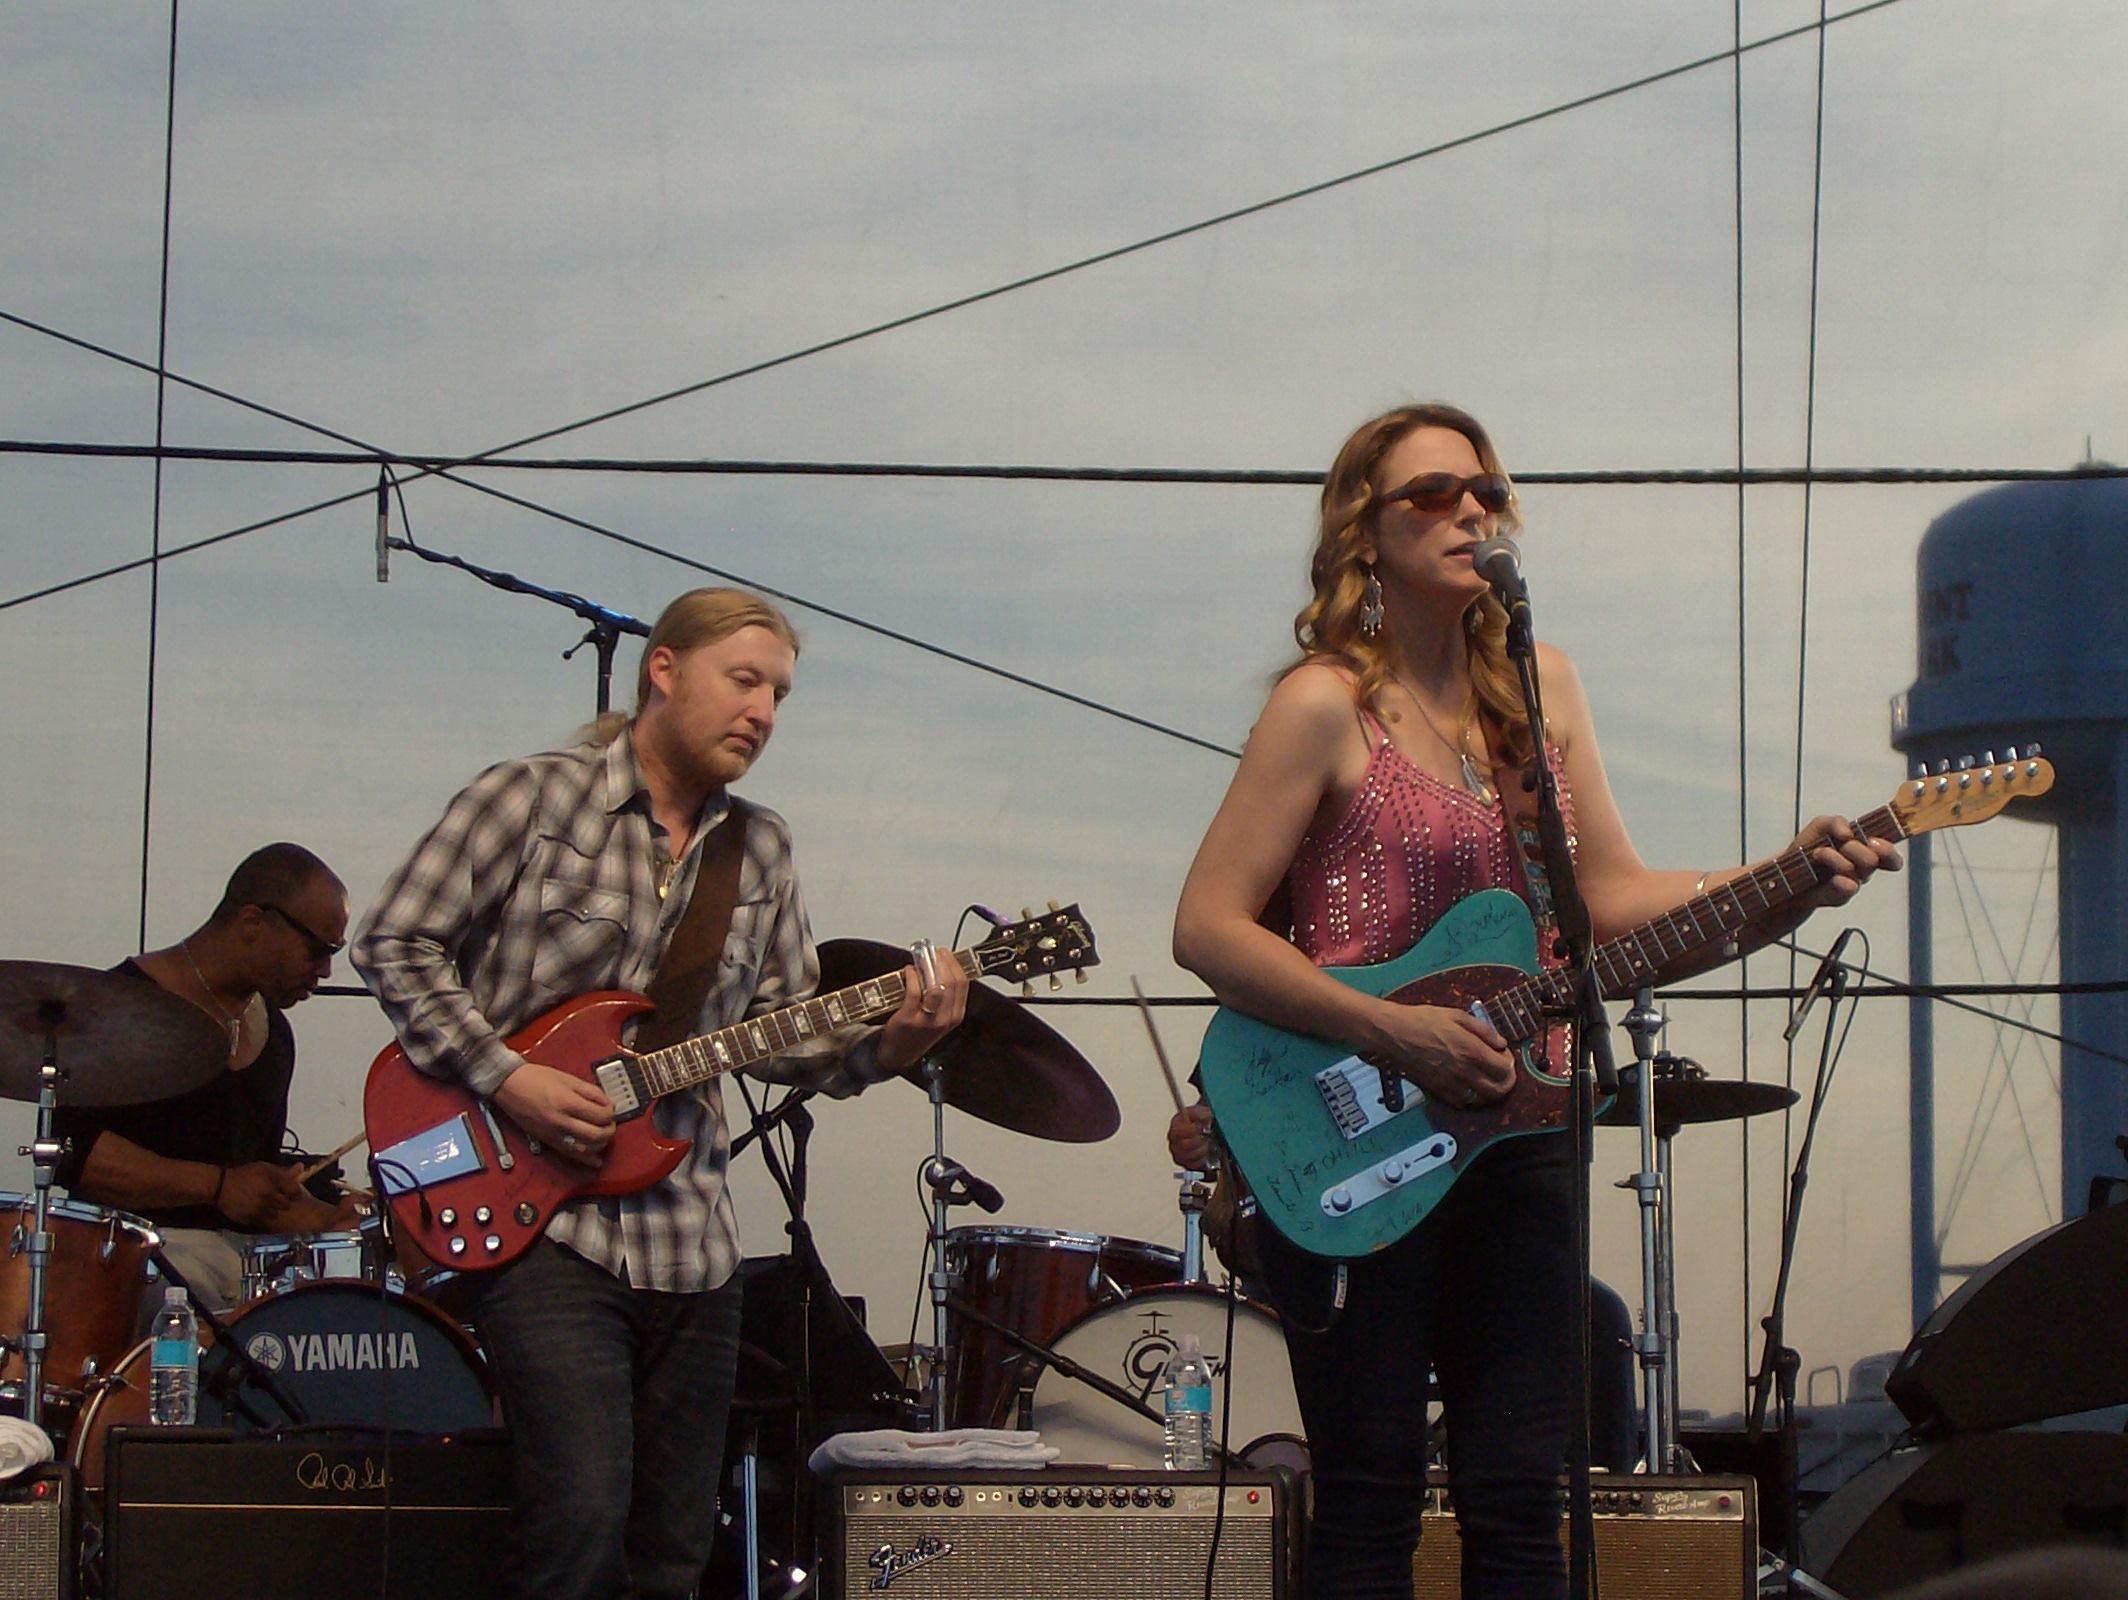 Here is a photo of Derek and Susan at the Chesapeake Bay Blues Festival, May 19 2012.